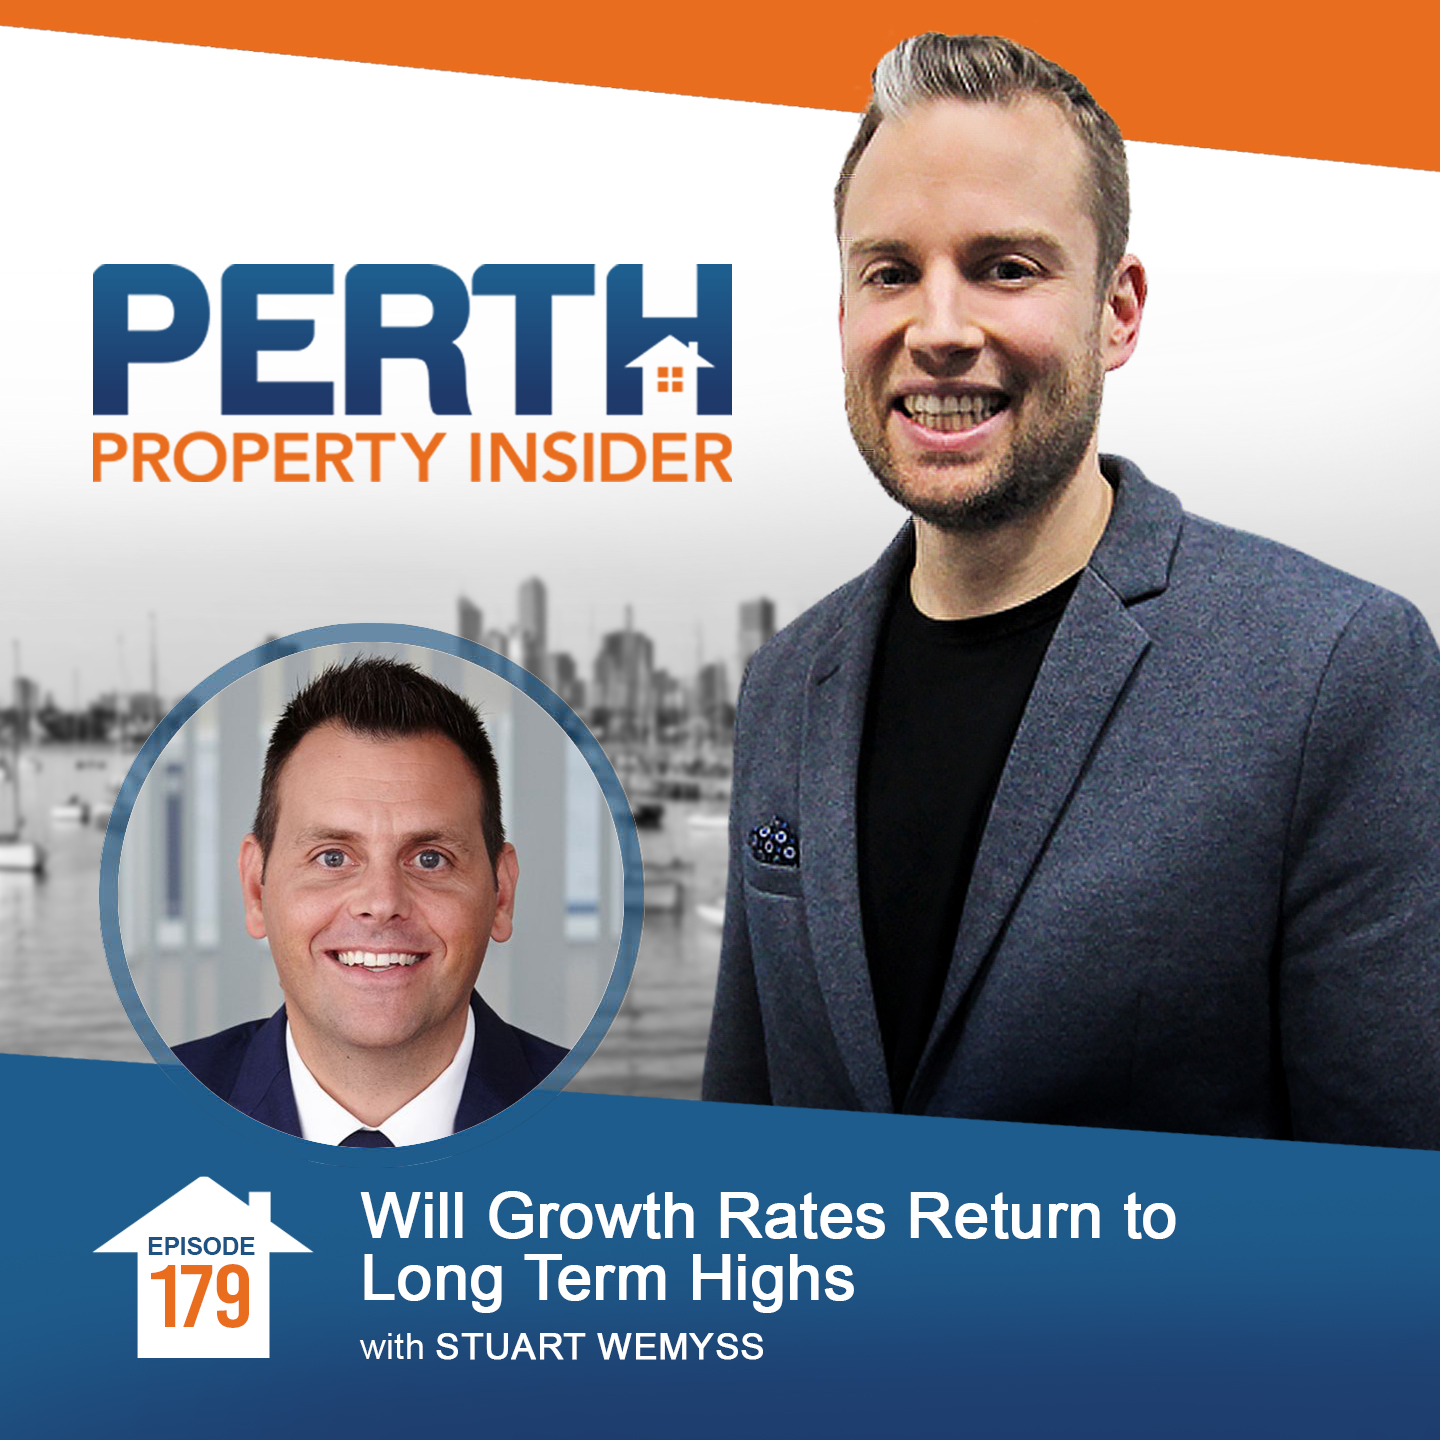 Will Growth Rates Return to Long Term Highs with Stuart Wemyss